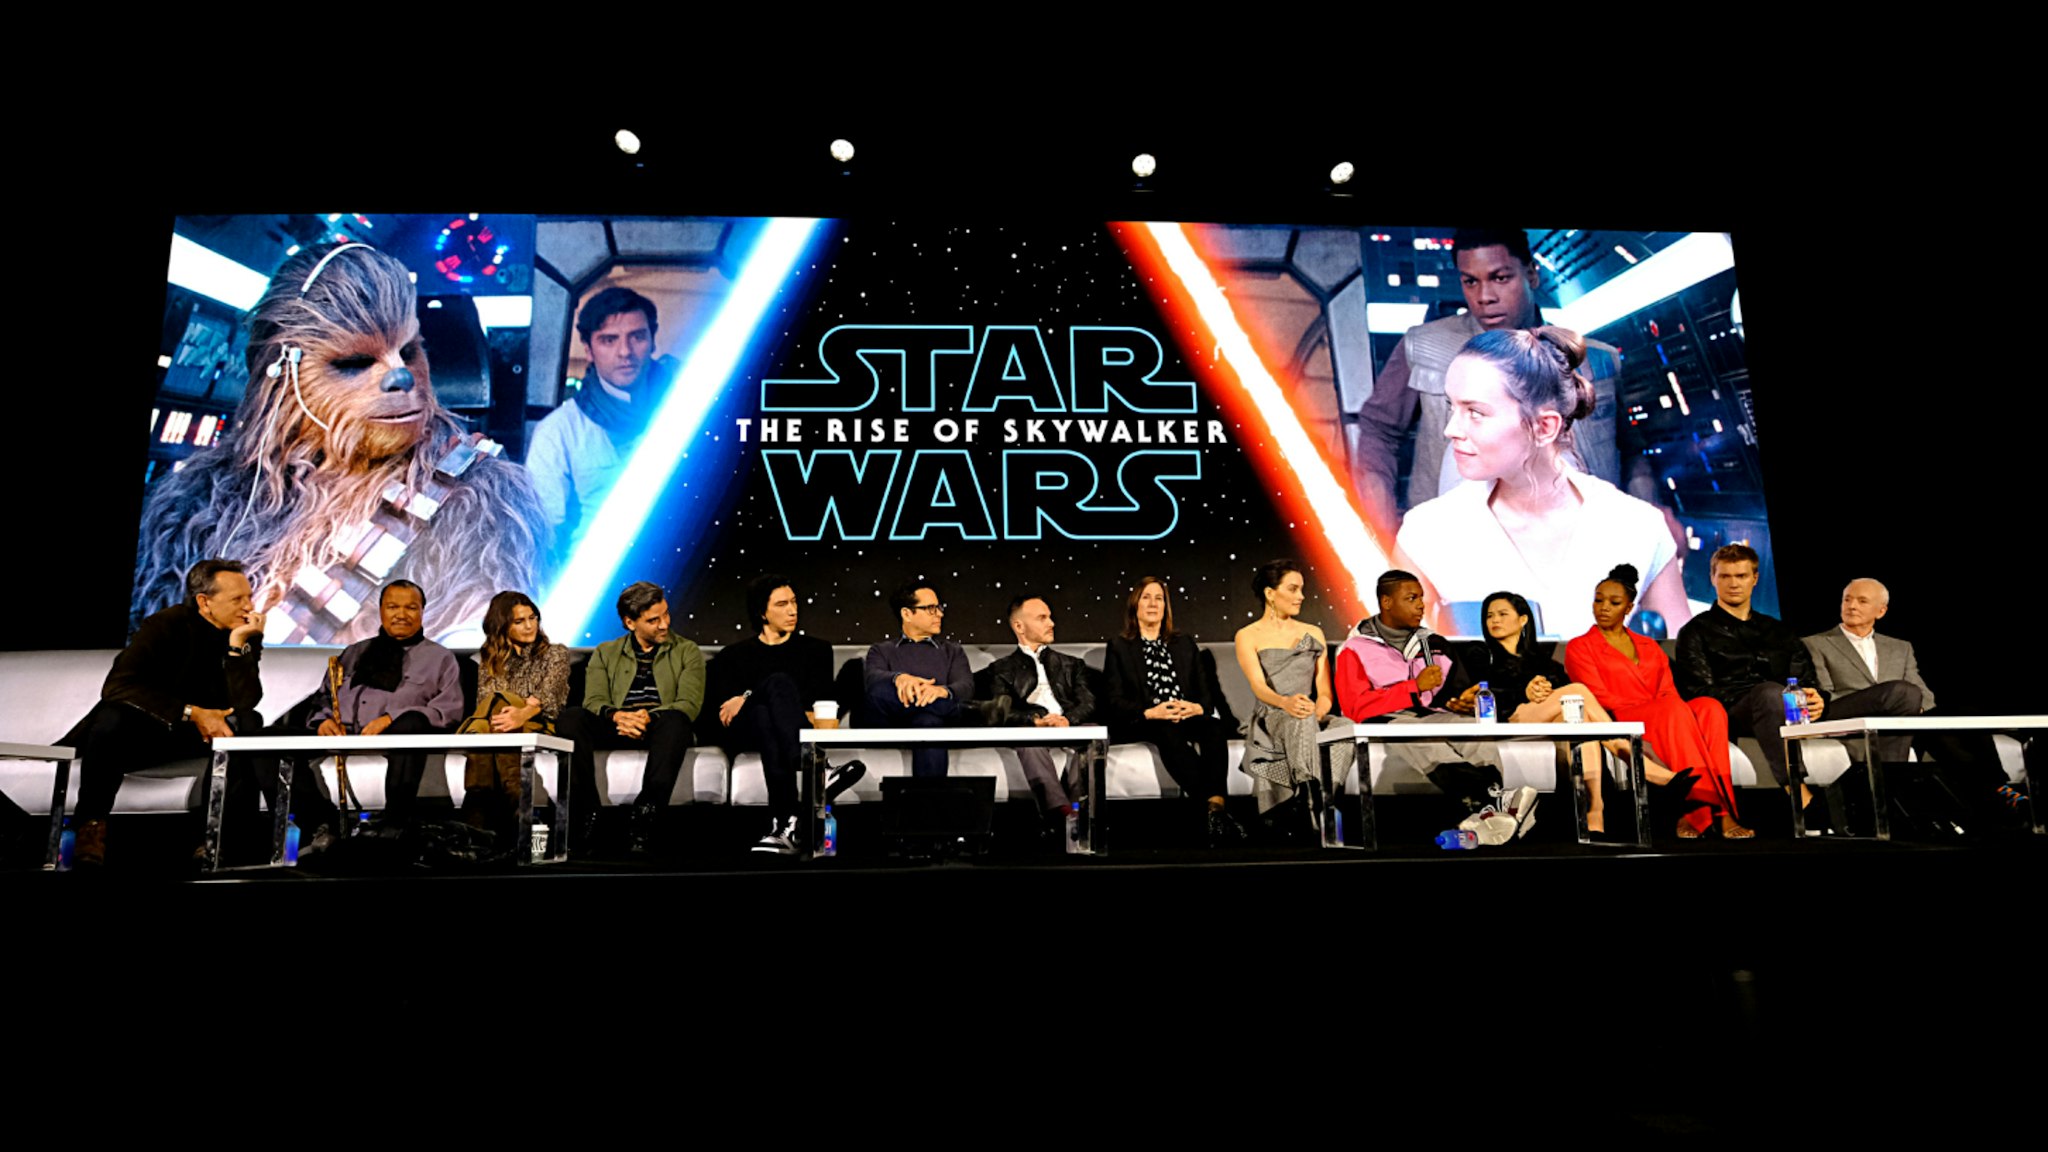 Actors participate in the global press conference for "Star Wars: The Rise of Skywalker" at the Pasadena Convention Center on December 04, 2019 in Pasadena, California.